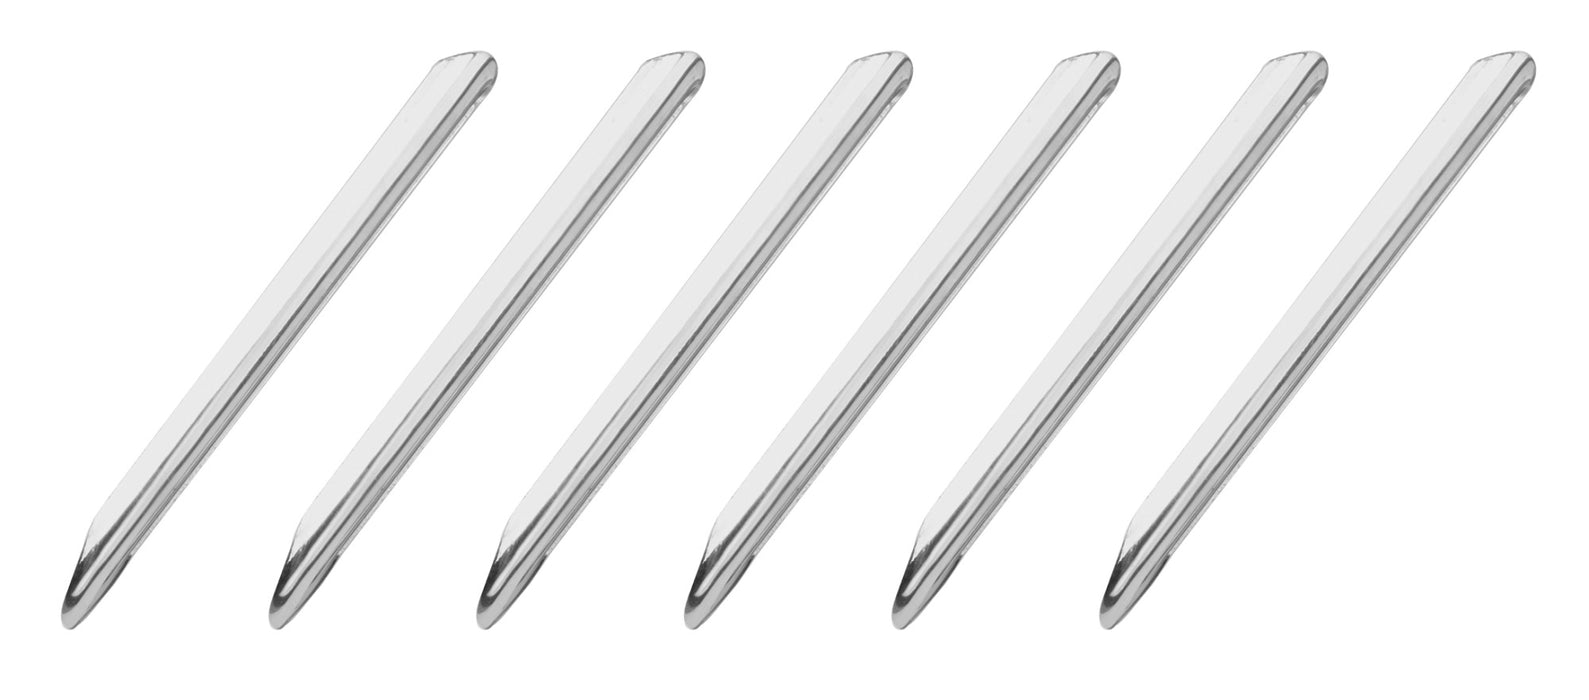 6PK Spatula Scoops, 6.3 Inch - Rounded / Pointed End - Stainless Steel